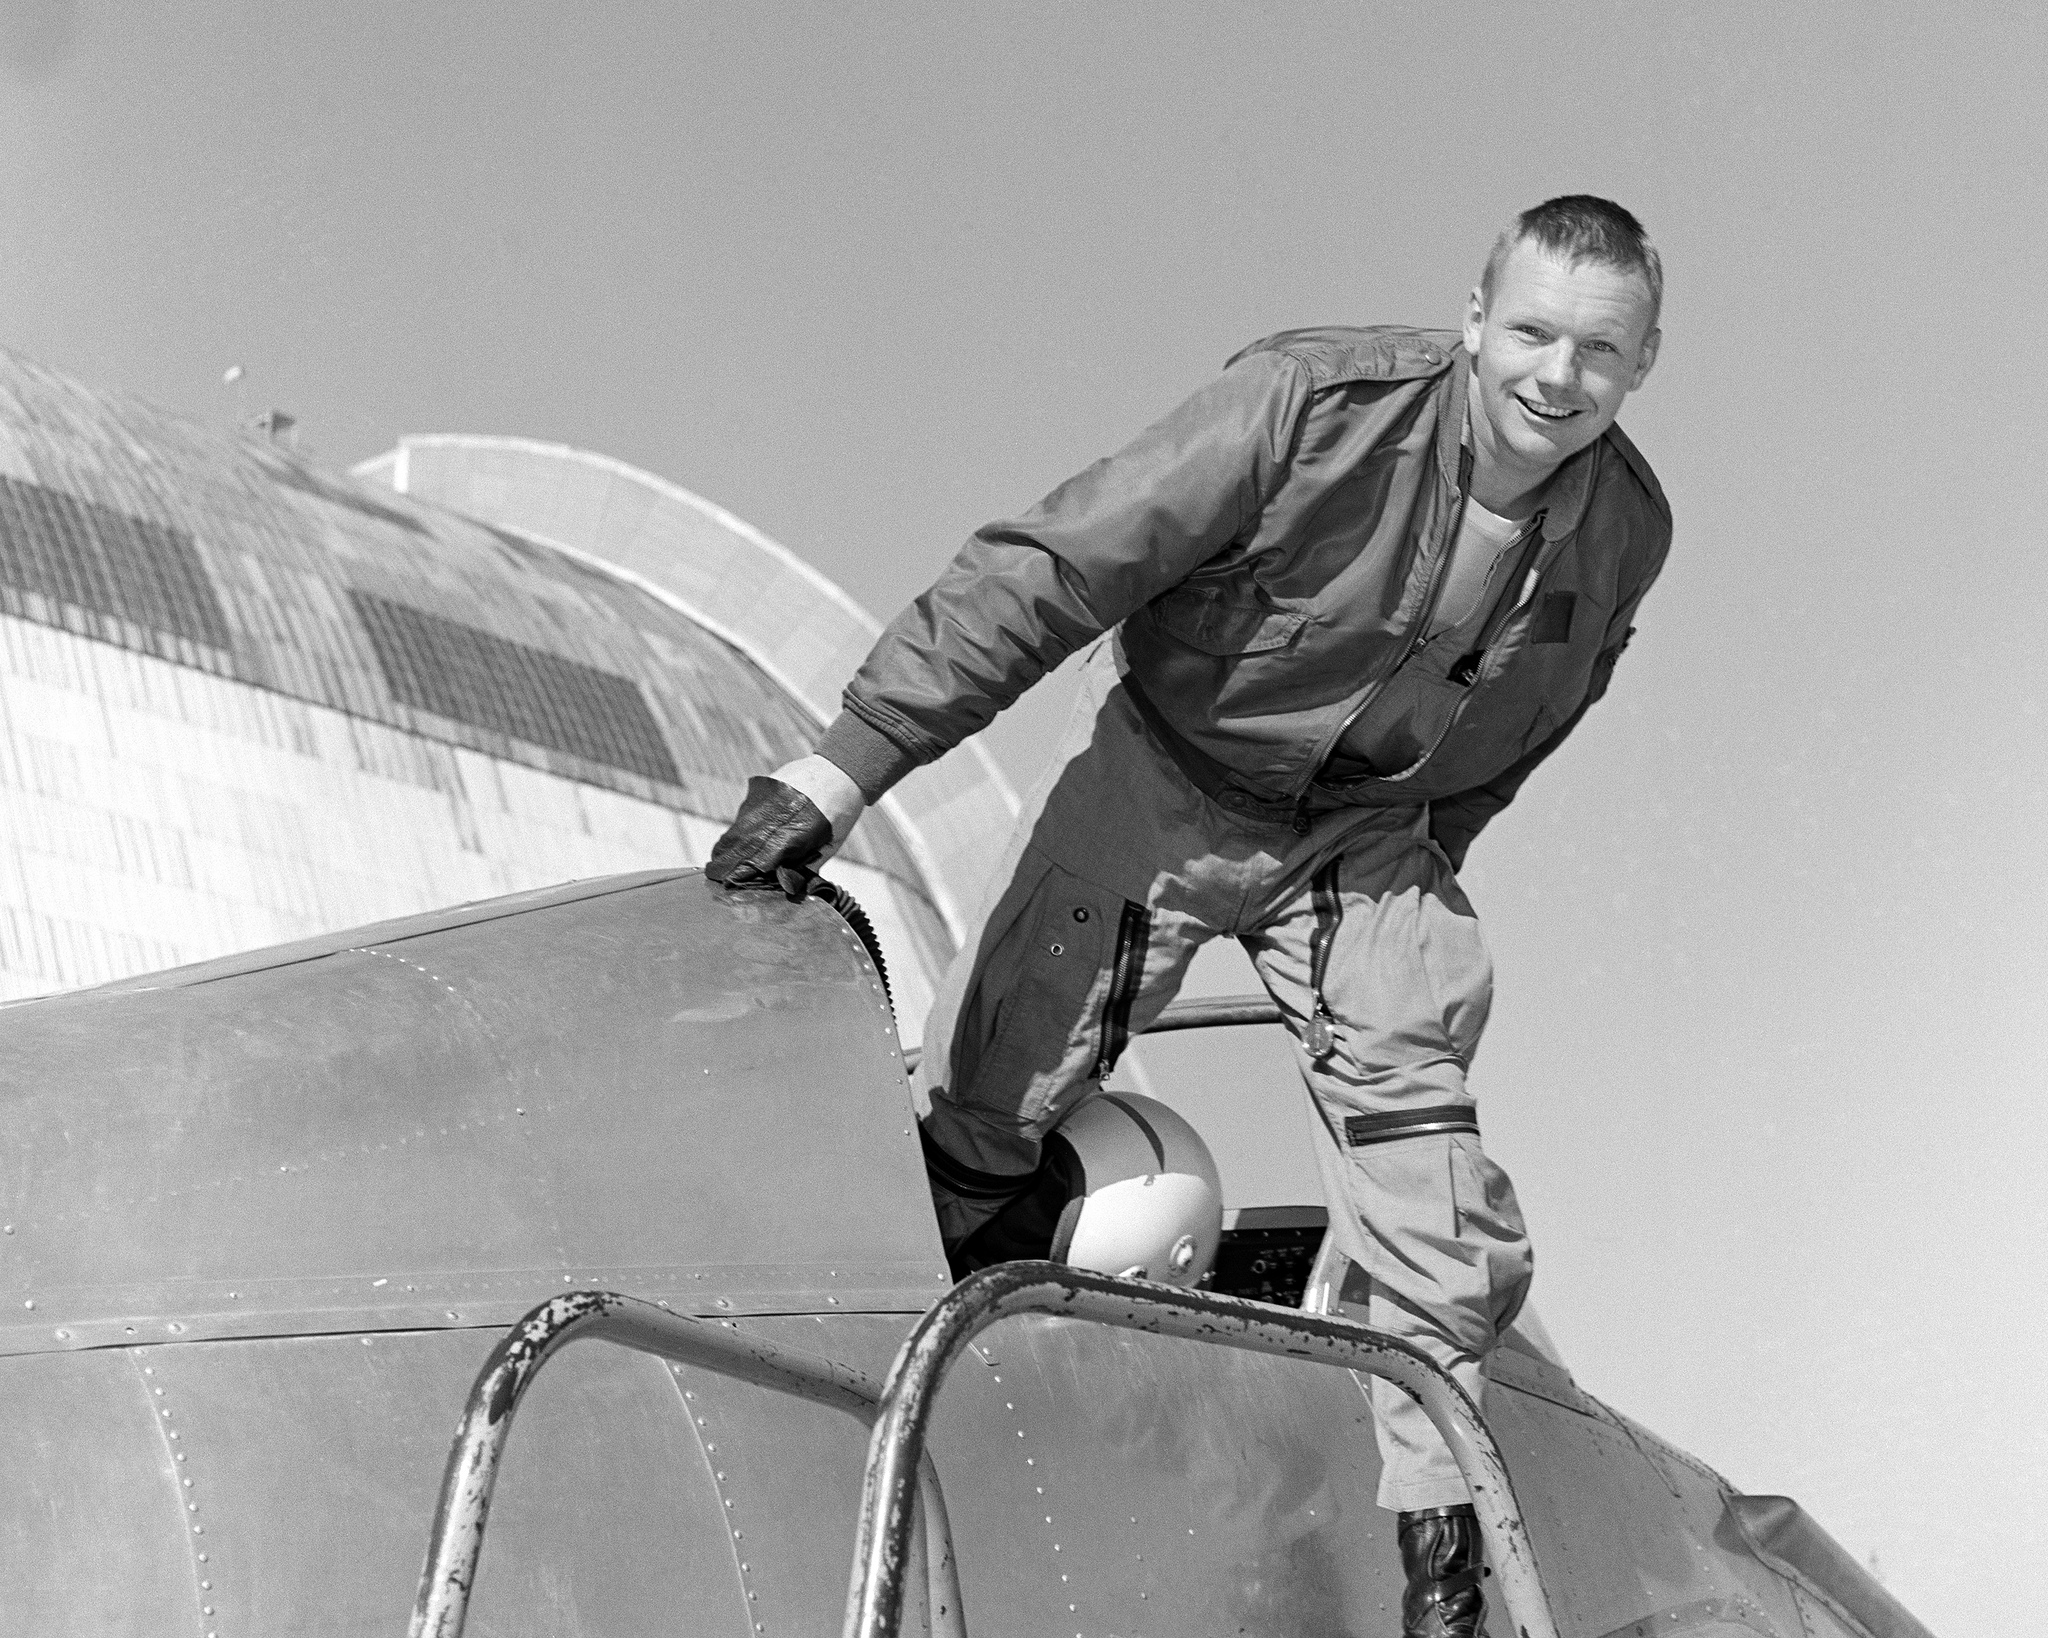 NASA Research Test Pilot Neail A. Armstrong with teh Bell X-14 at NASA Ames Research Center, February 1964. (NASA)